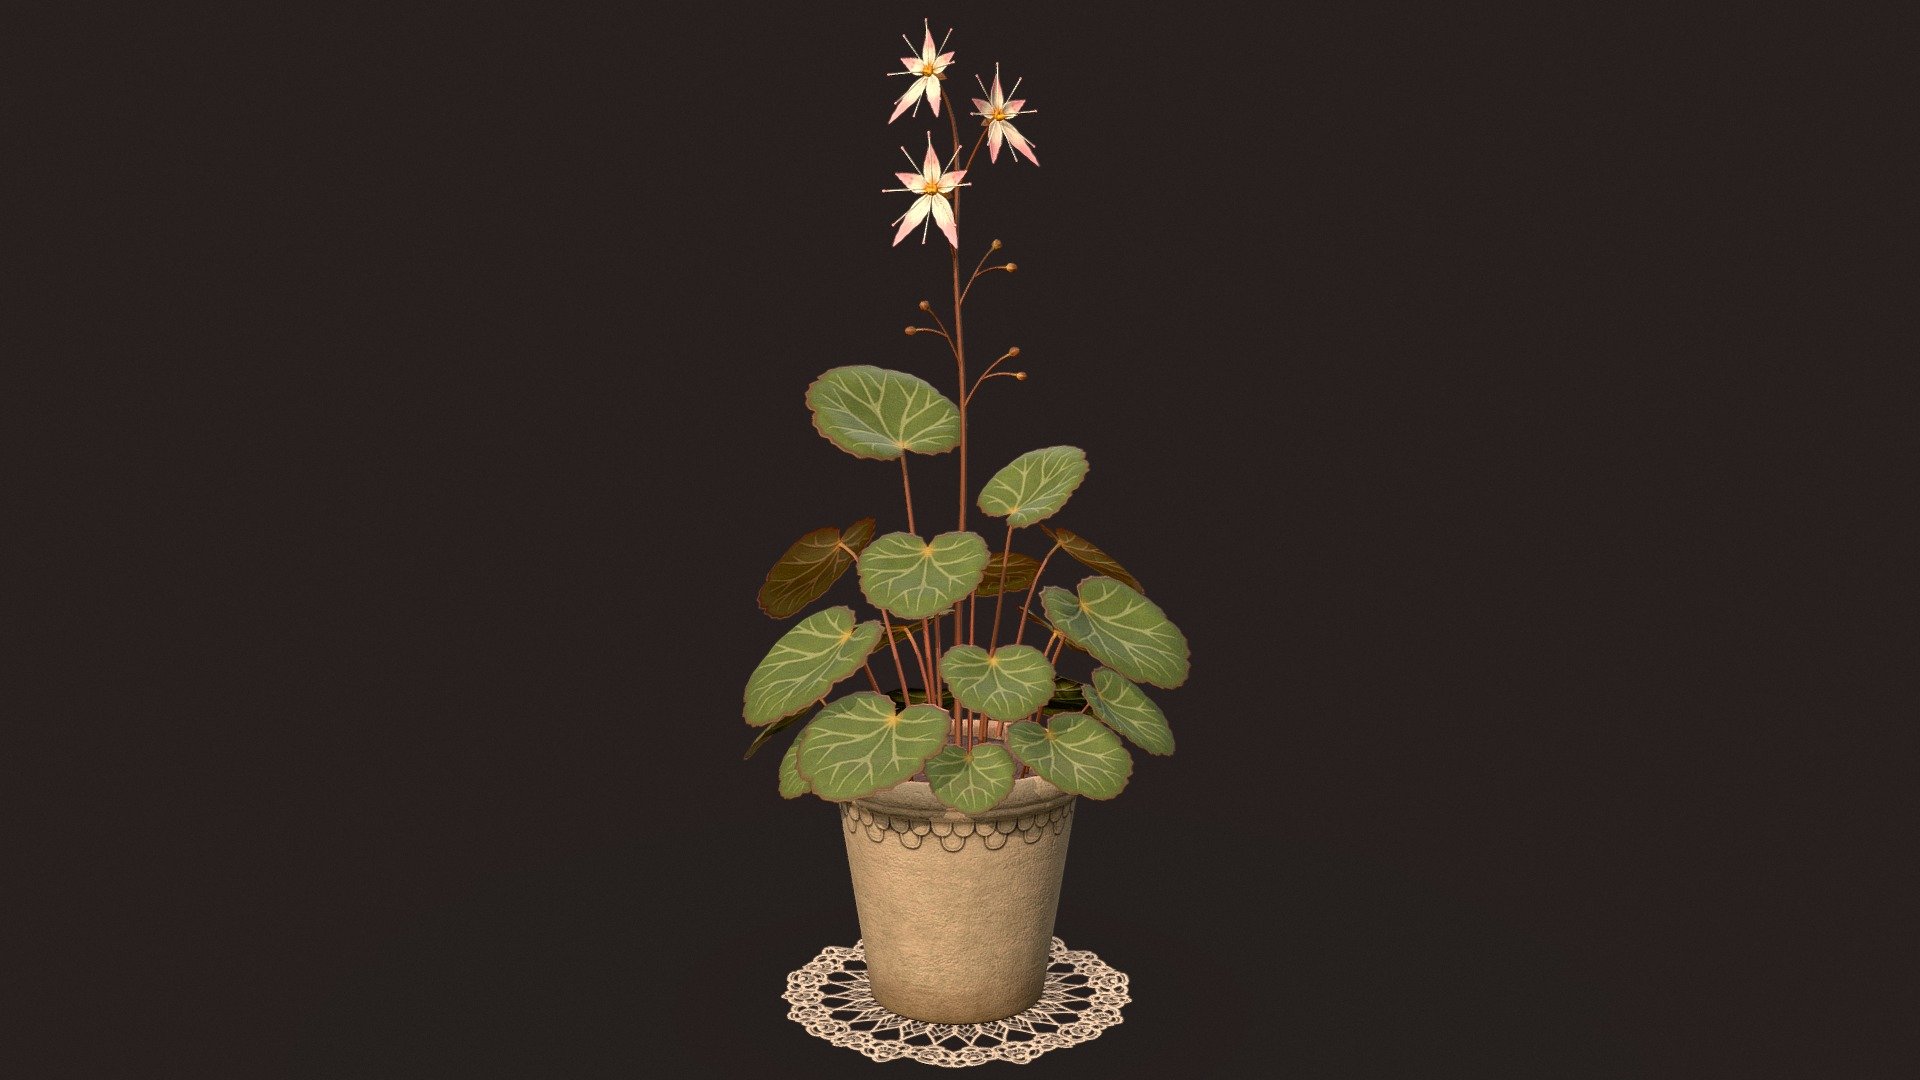 House Plant (Saxifraga stolonifera) it's a lowpoly game ready model with unwrapped UVs and PBR textures.

Normal map was baked from a high poly model. 

UVs: channel 1: overlapping; channel 2: non-overlapping (for baking lightmaps).

Formats: FBX, Obj. Marmoset Toolbag scene 3.08 (.tbscene) Textures format: TGA. Textures resolution: 4096x4096px. 

Textures set includes: 




Metal_Roughness: BaseColor, Roughness, Metallic, Normal, Height, AO. 

Unity 5 (Standart Metallic): AlbedoTransparency, AO, Normal, MetallicSmoothness. 

Unreal Engine 4: BaseColor, OcclusionRoughnessMetallic, Normal. 



Artstation: https://www.artstation.com/tatianagladkaya

Instagram: https://www.instagram.com/t.gladkaya_ - House Plant (Saxifraga stolonifera) - 3D model by Tatiana Gladkaya (@tatiana_gladkaya) 3d model